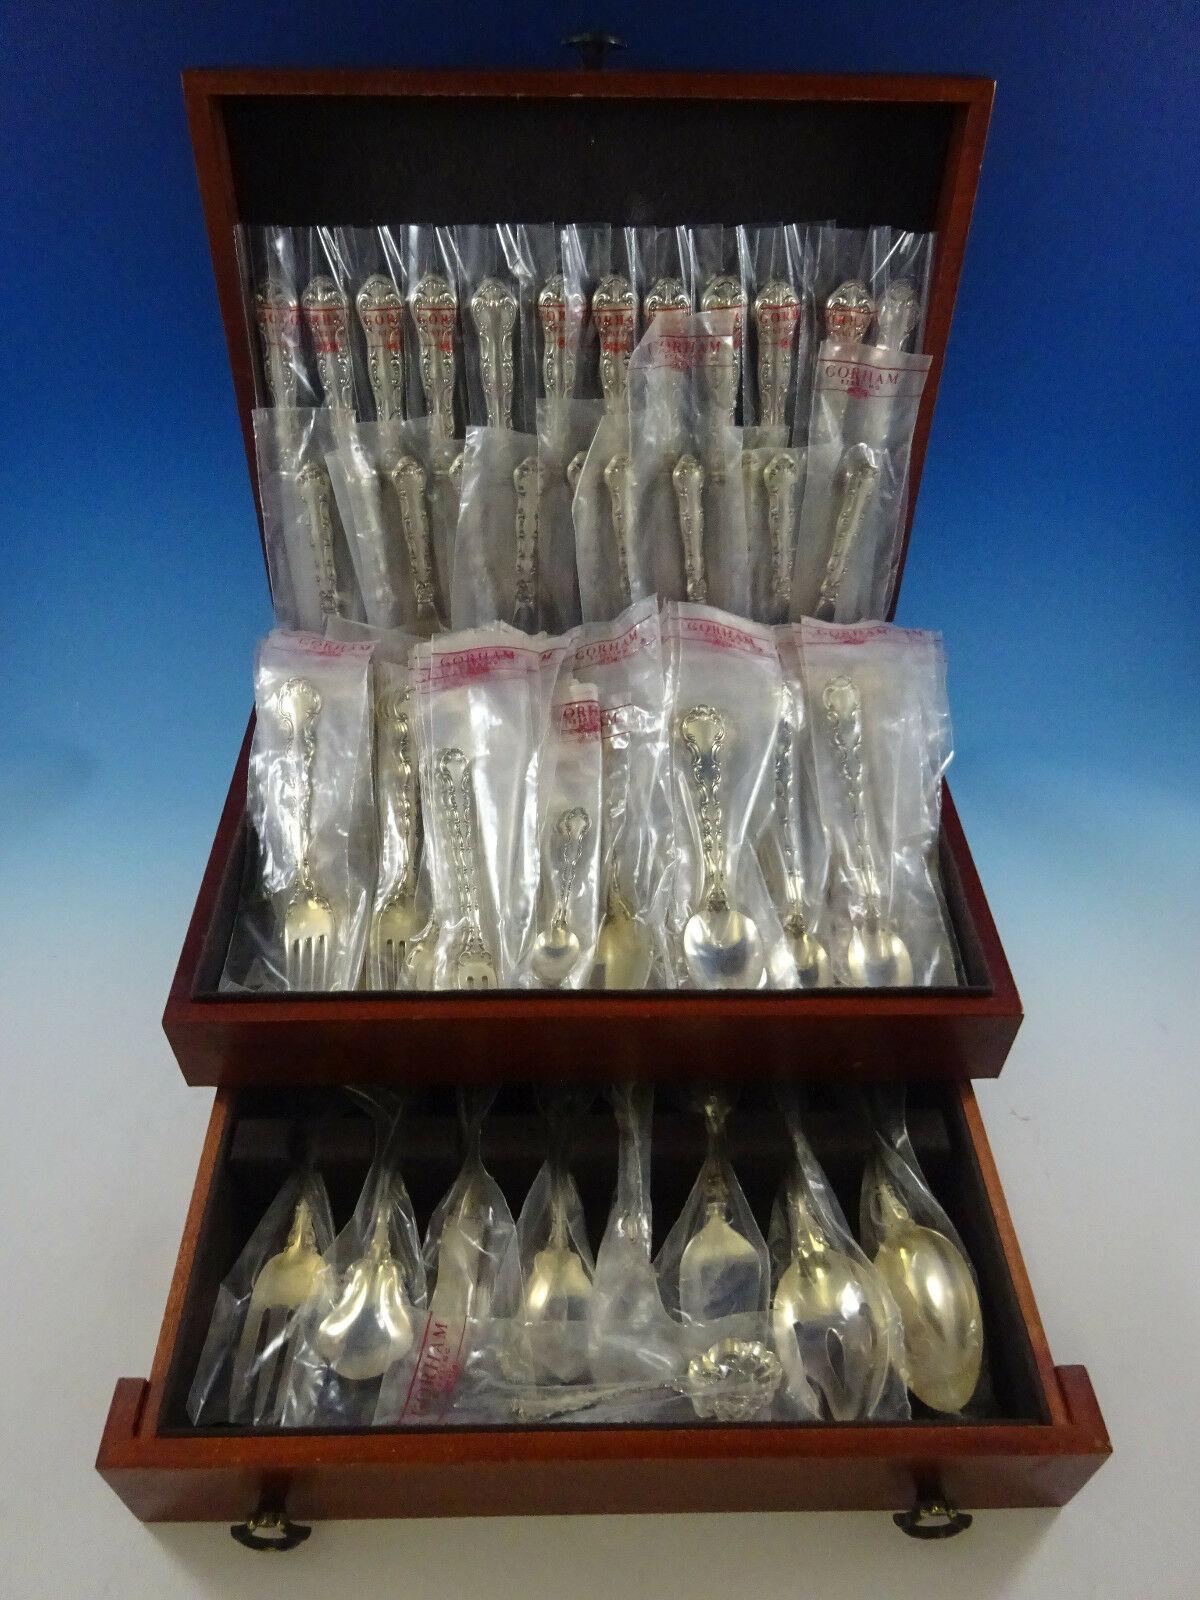 New and unused Strasbourg by Gorham sterling silver Place Size flatware set - 117 pieces. This set includes:

12 place size knives, 9 1/4